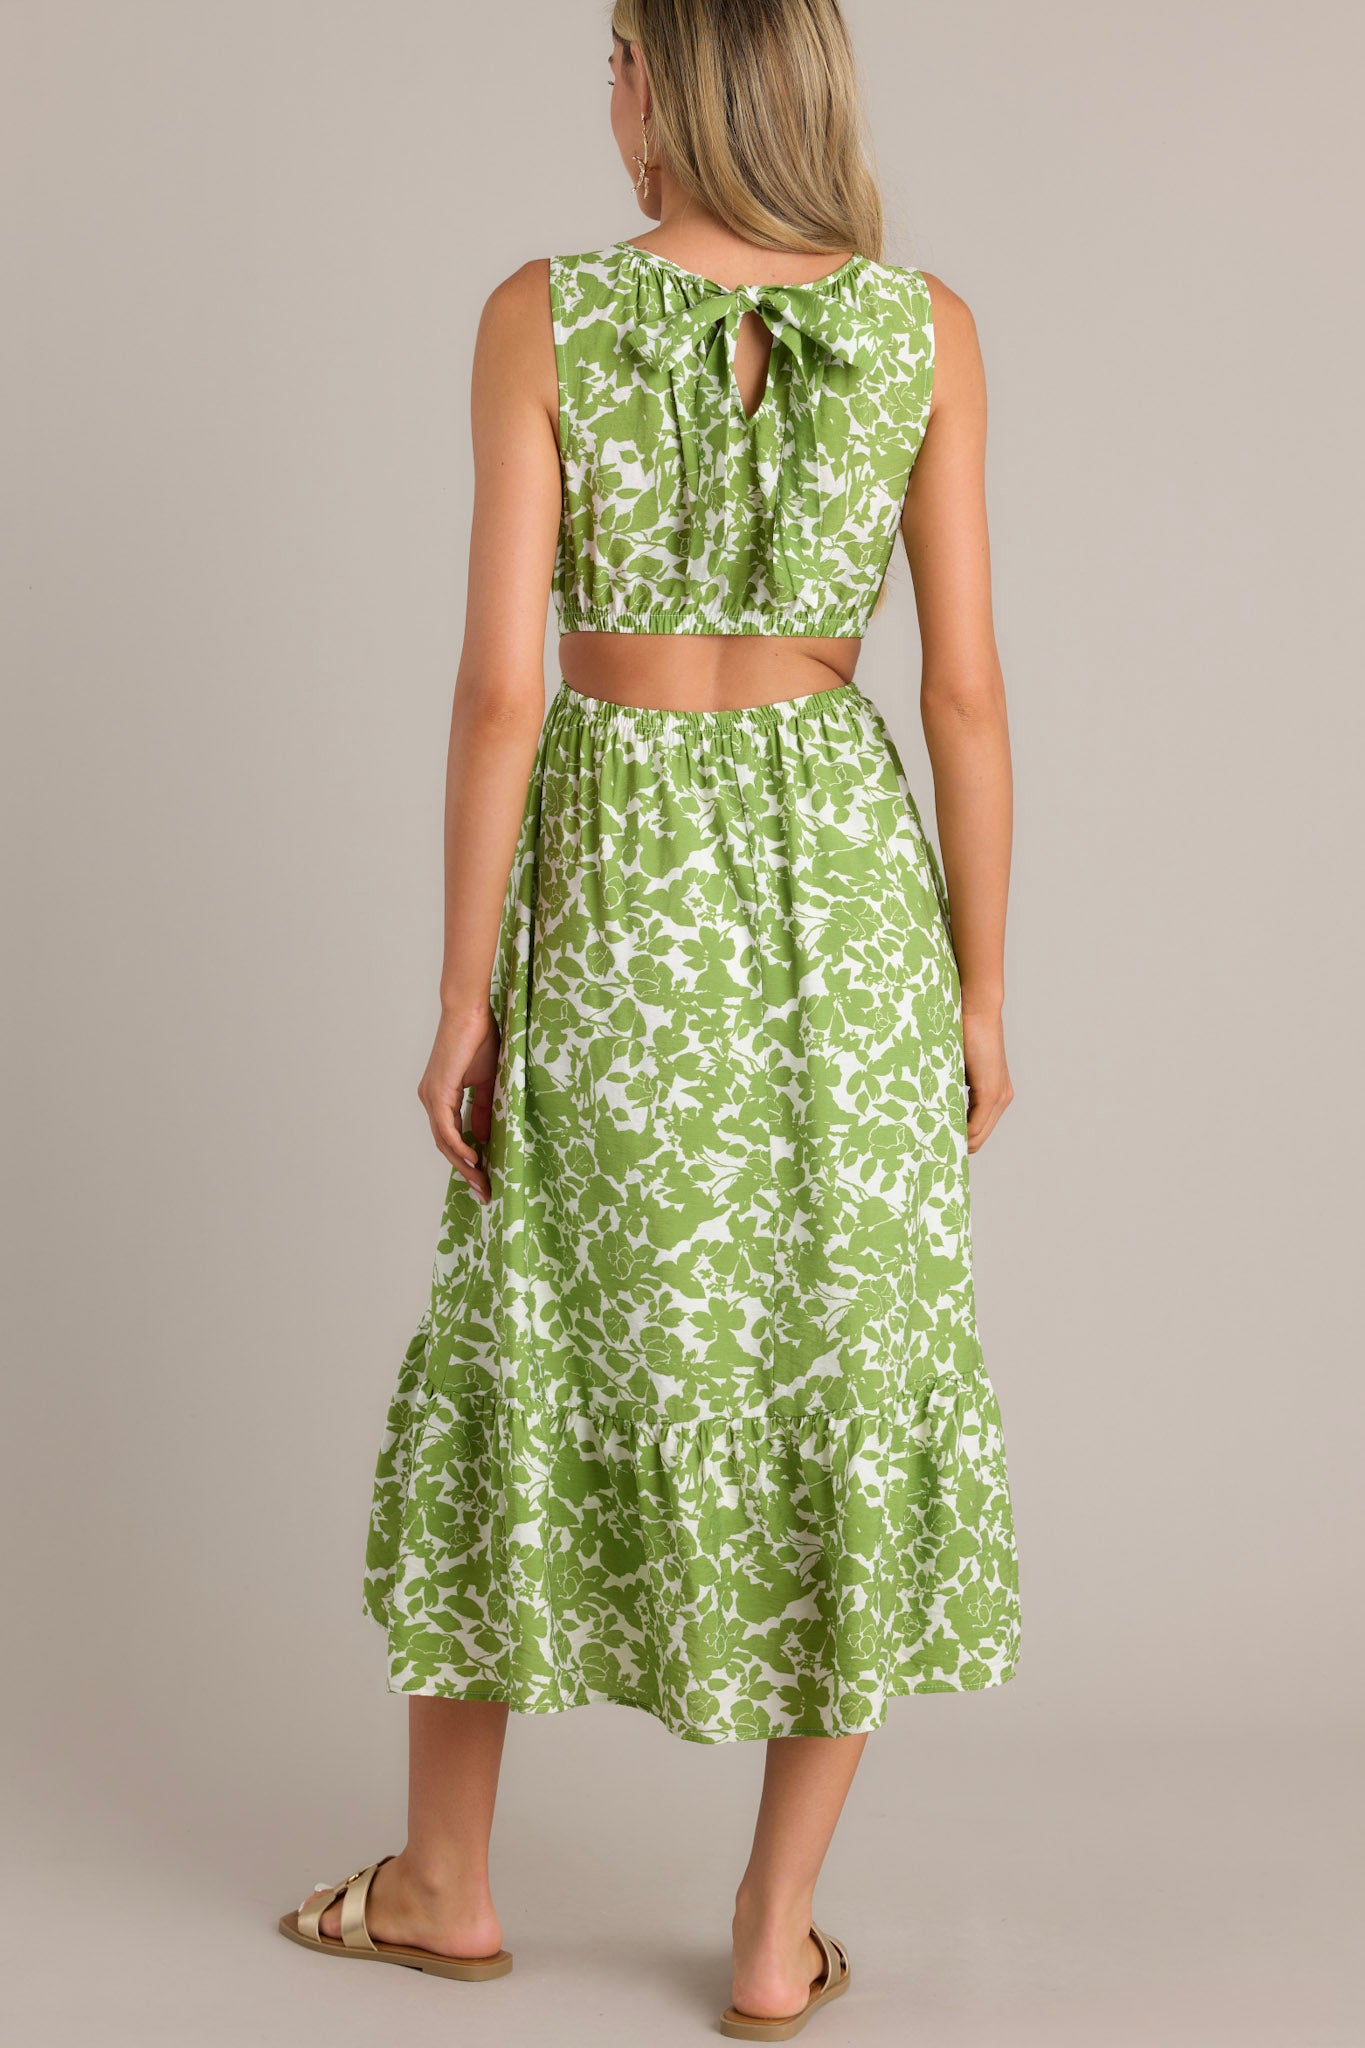 Back view of a green and white floral print sleeveless dress with a back bow detail, side cutouts, and a gathered waist, highlighting the open back and flowy tiered skirt.